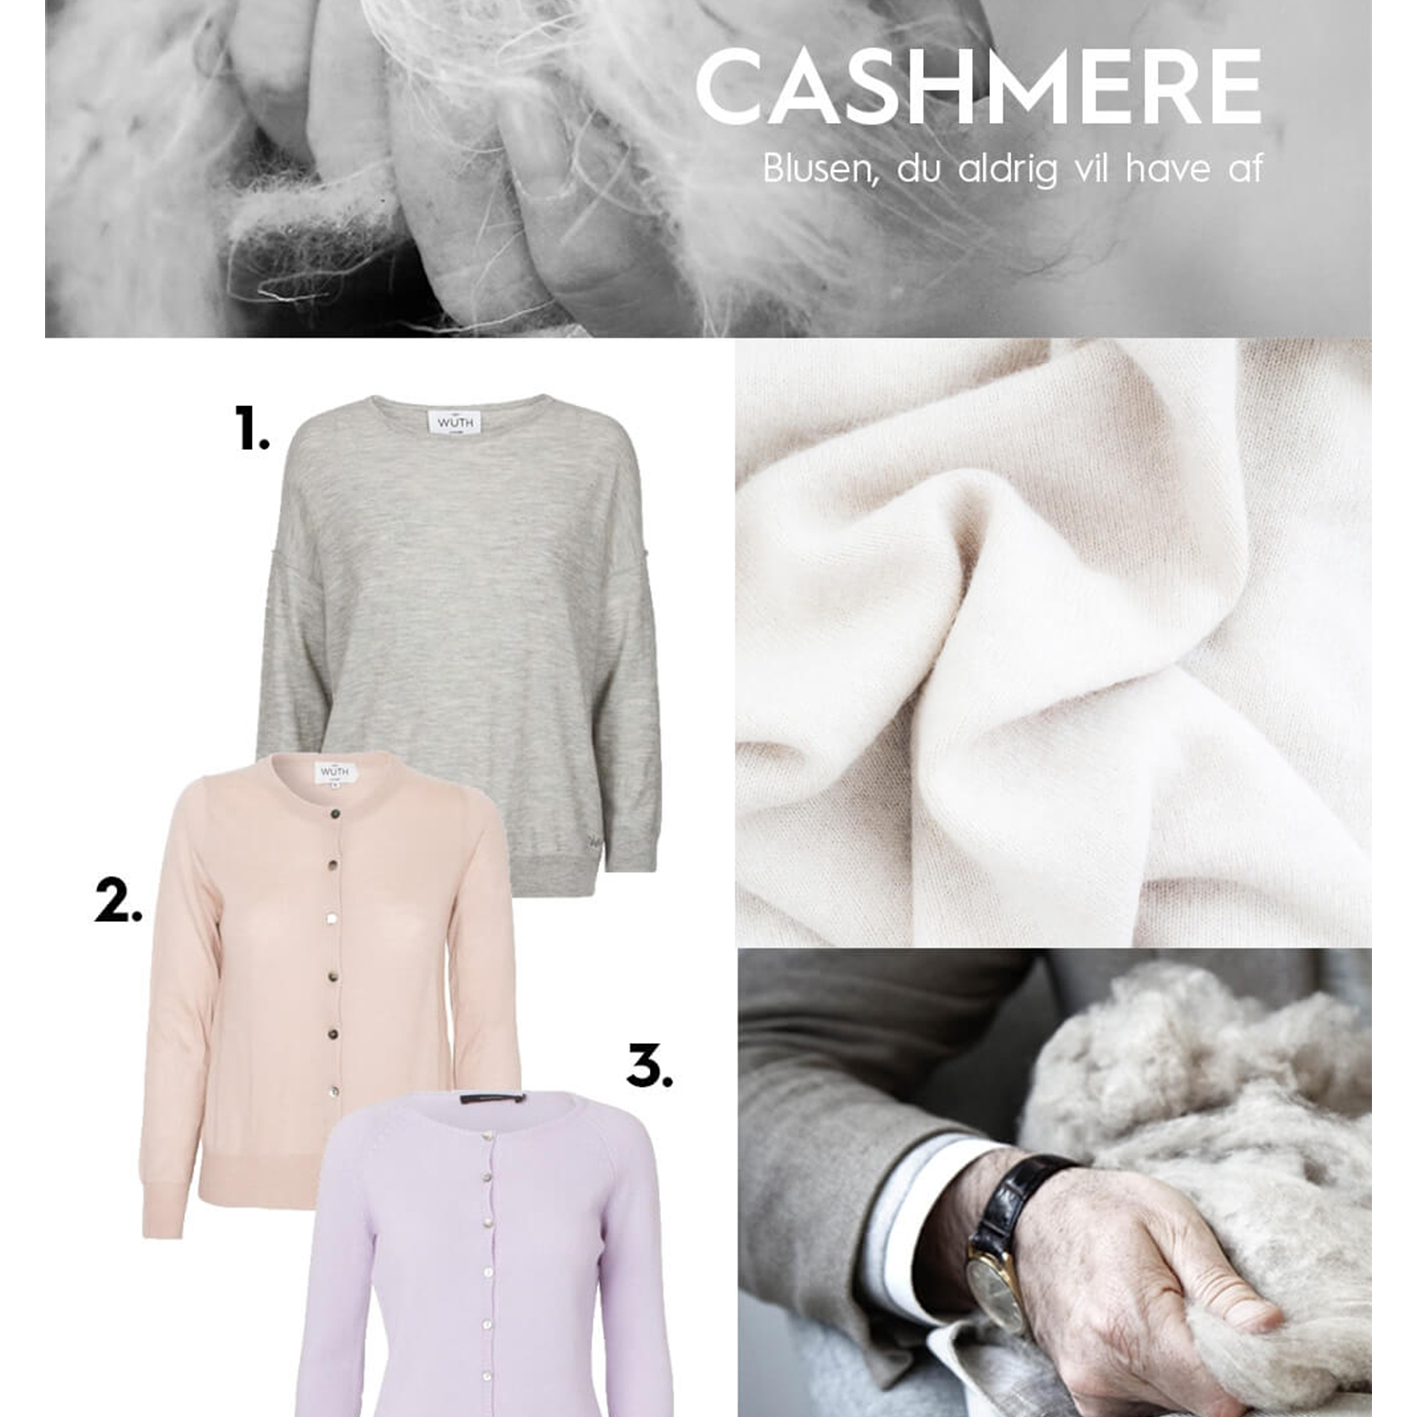 Wuth Cashmere sweater and cardigan at the Hausfrau blog